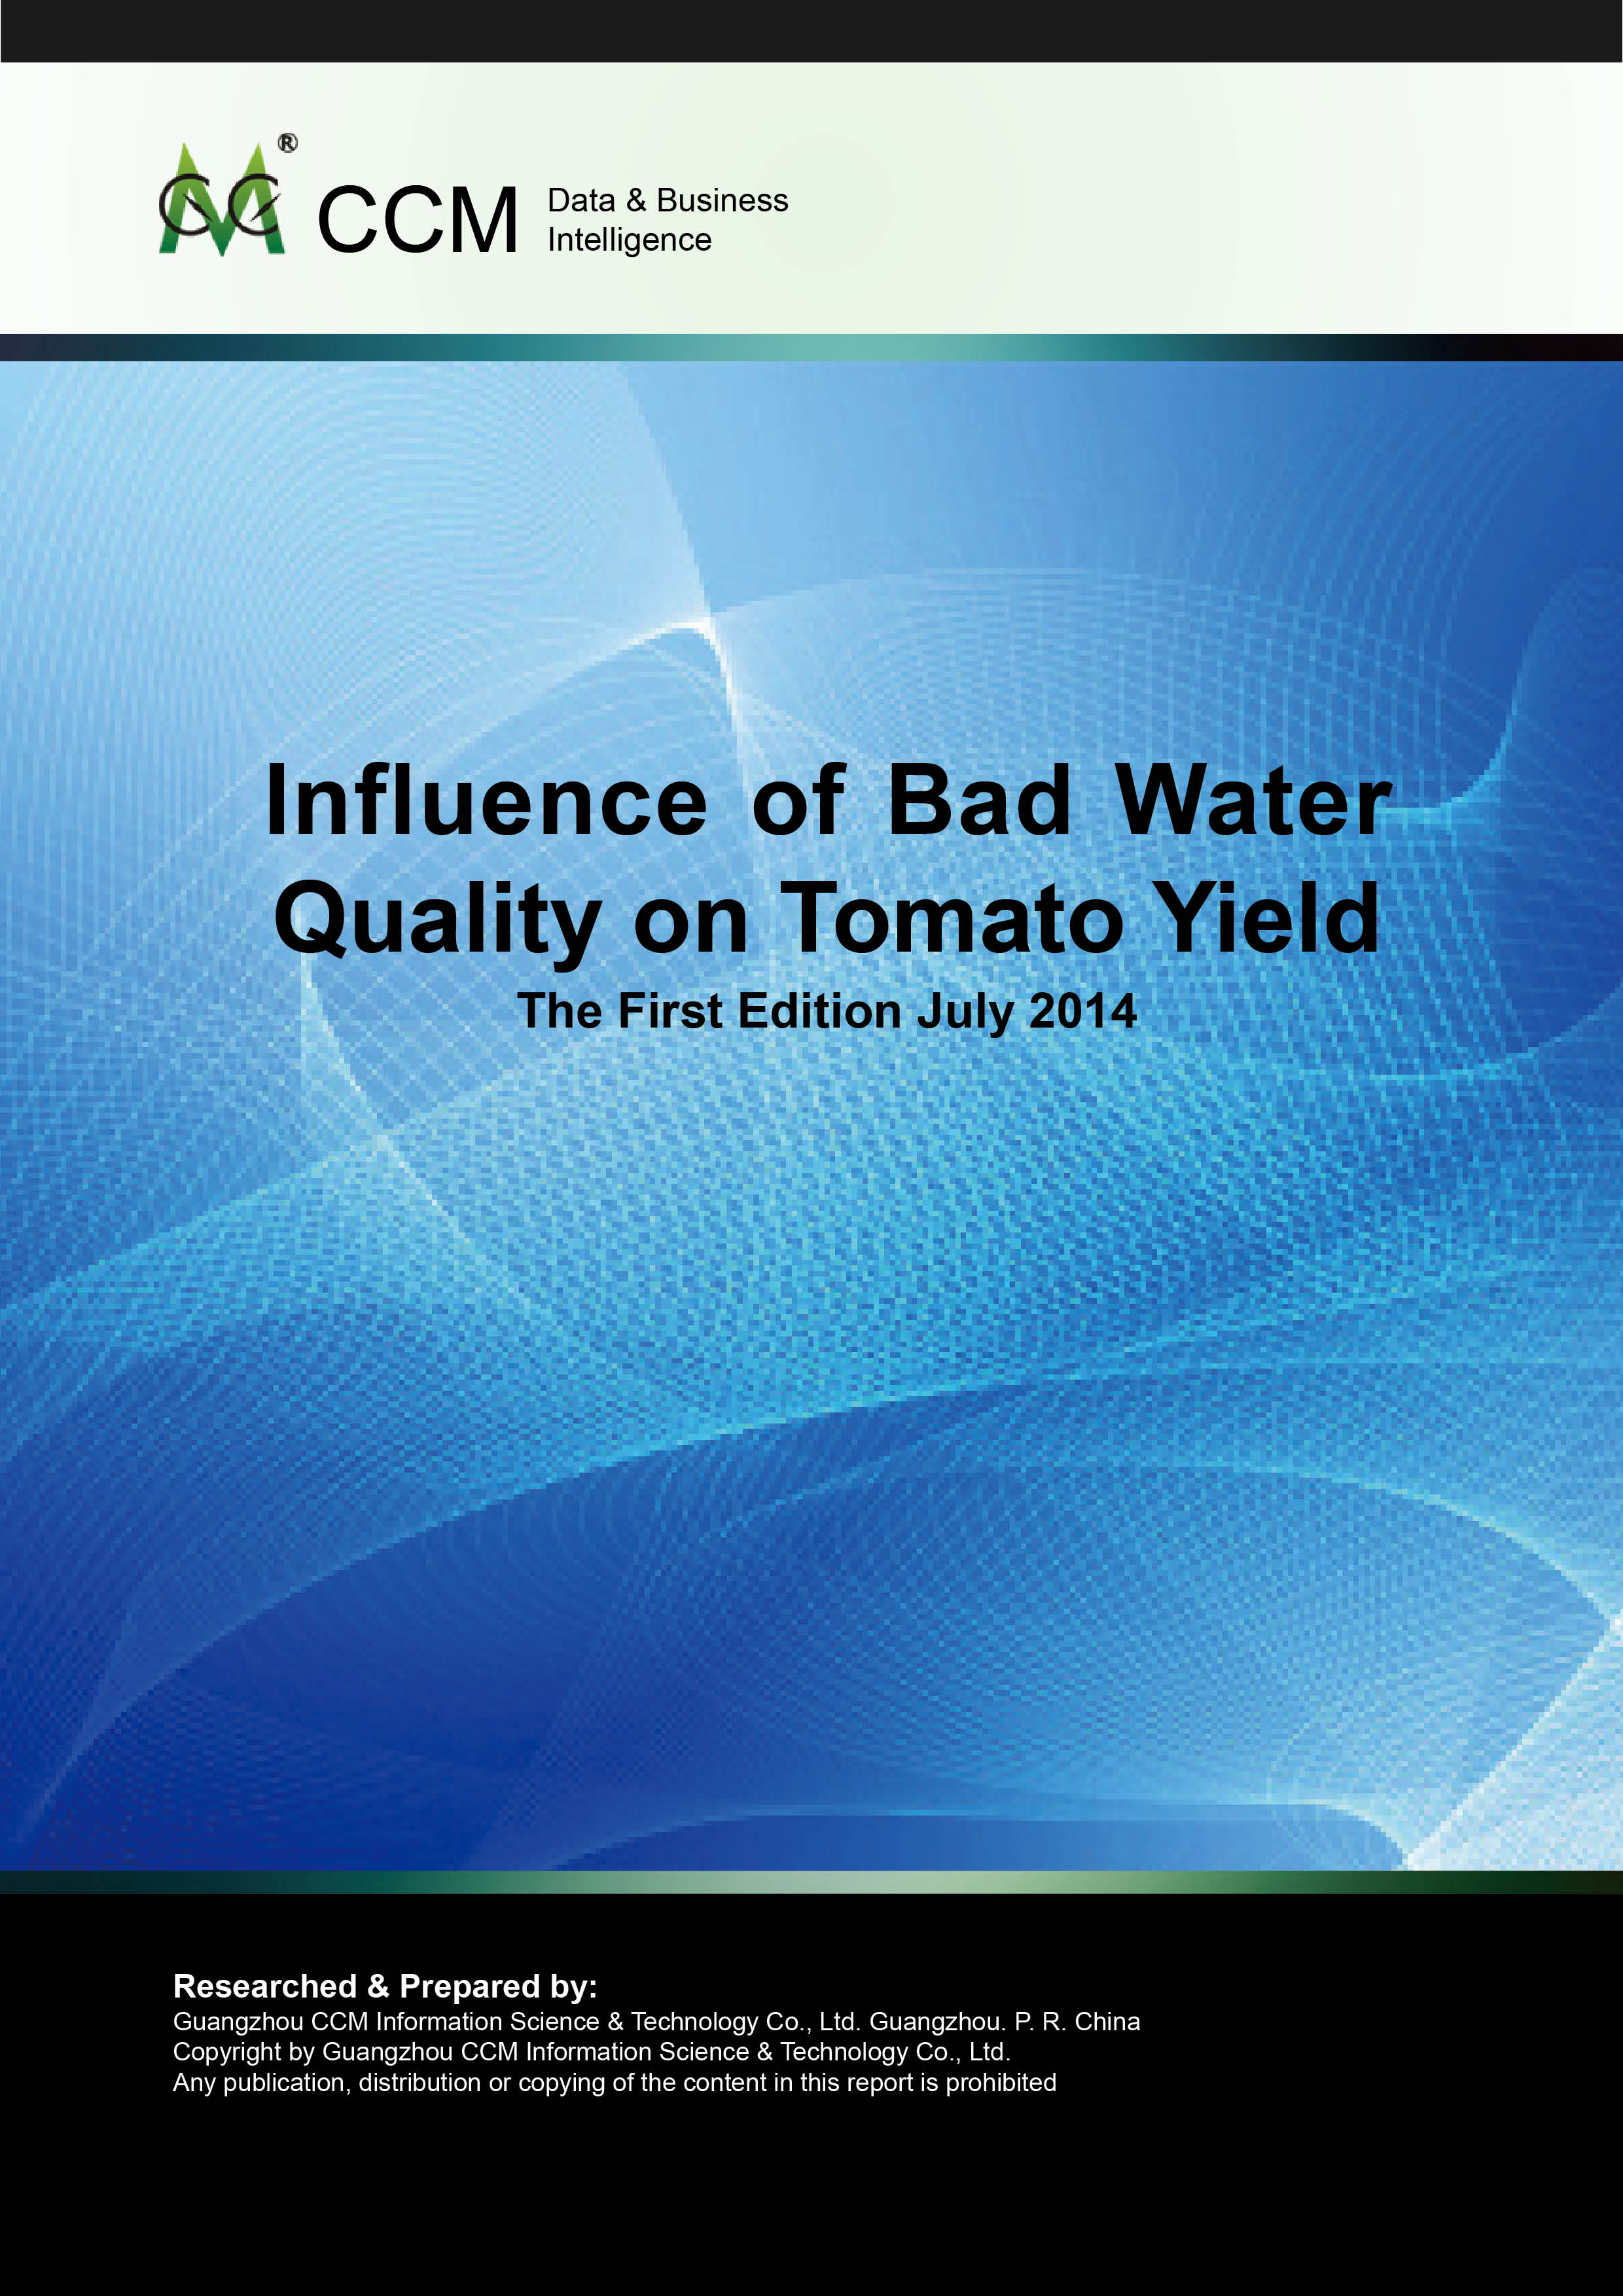 Influence of Bad Water Quality on Tomato Yield (China Scope)